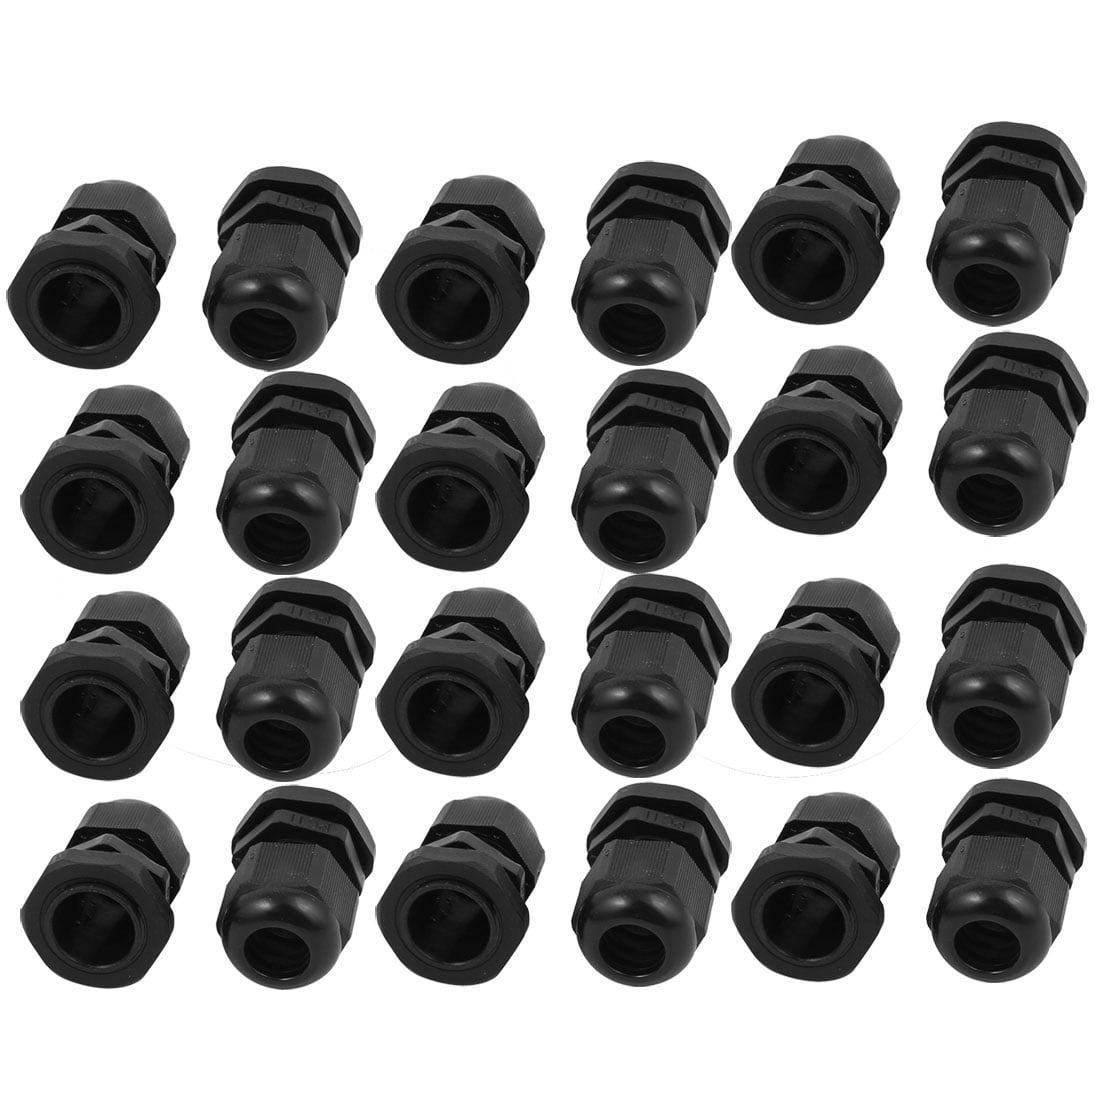 uxcell M20 x 1.5 Waterproof IP68 Safety Nylon Cable Gland Connector Joints Black 24pcs 